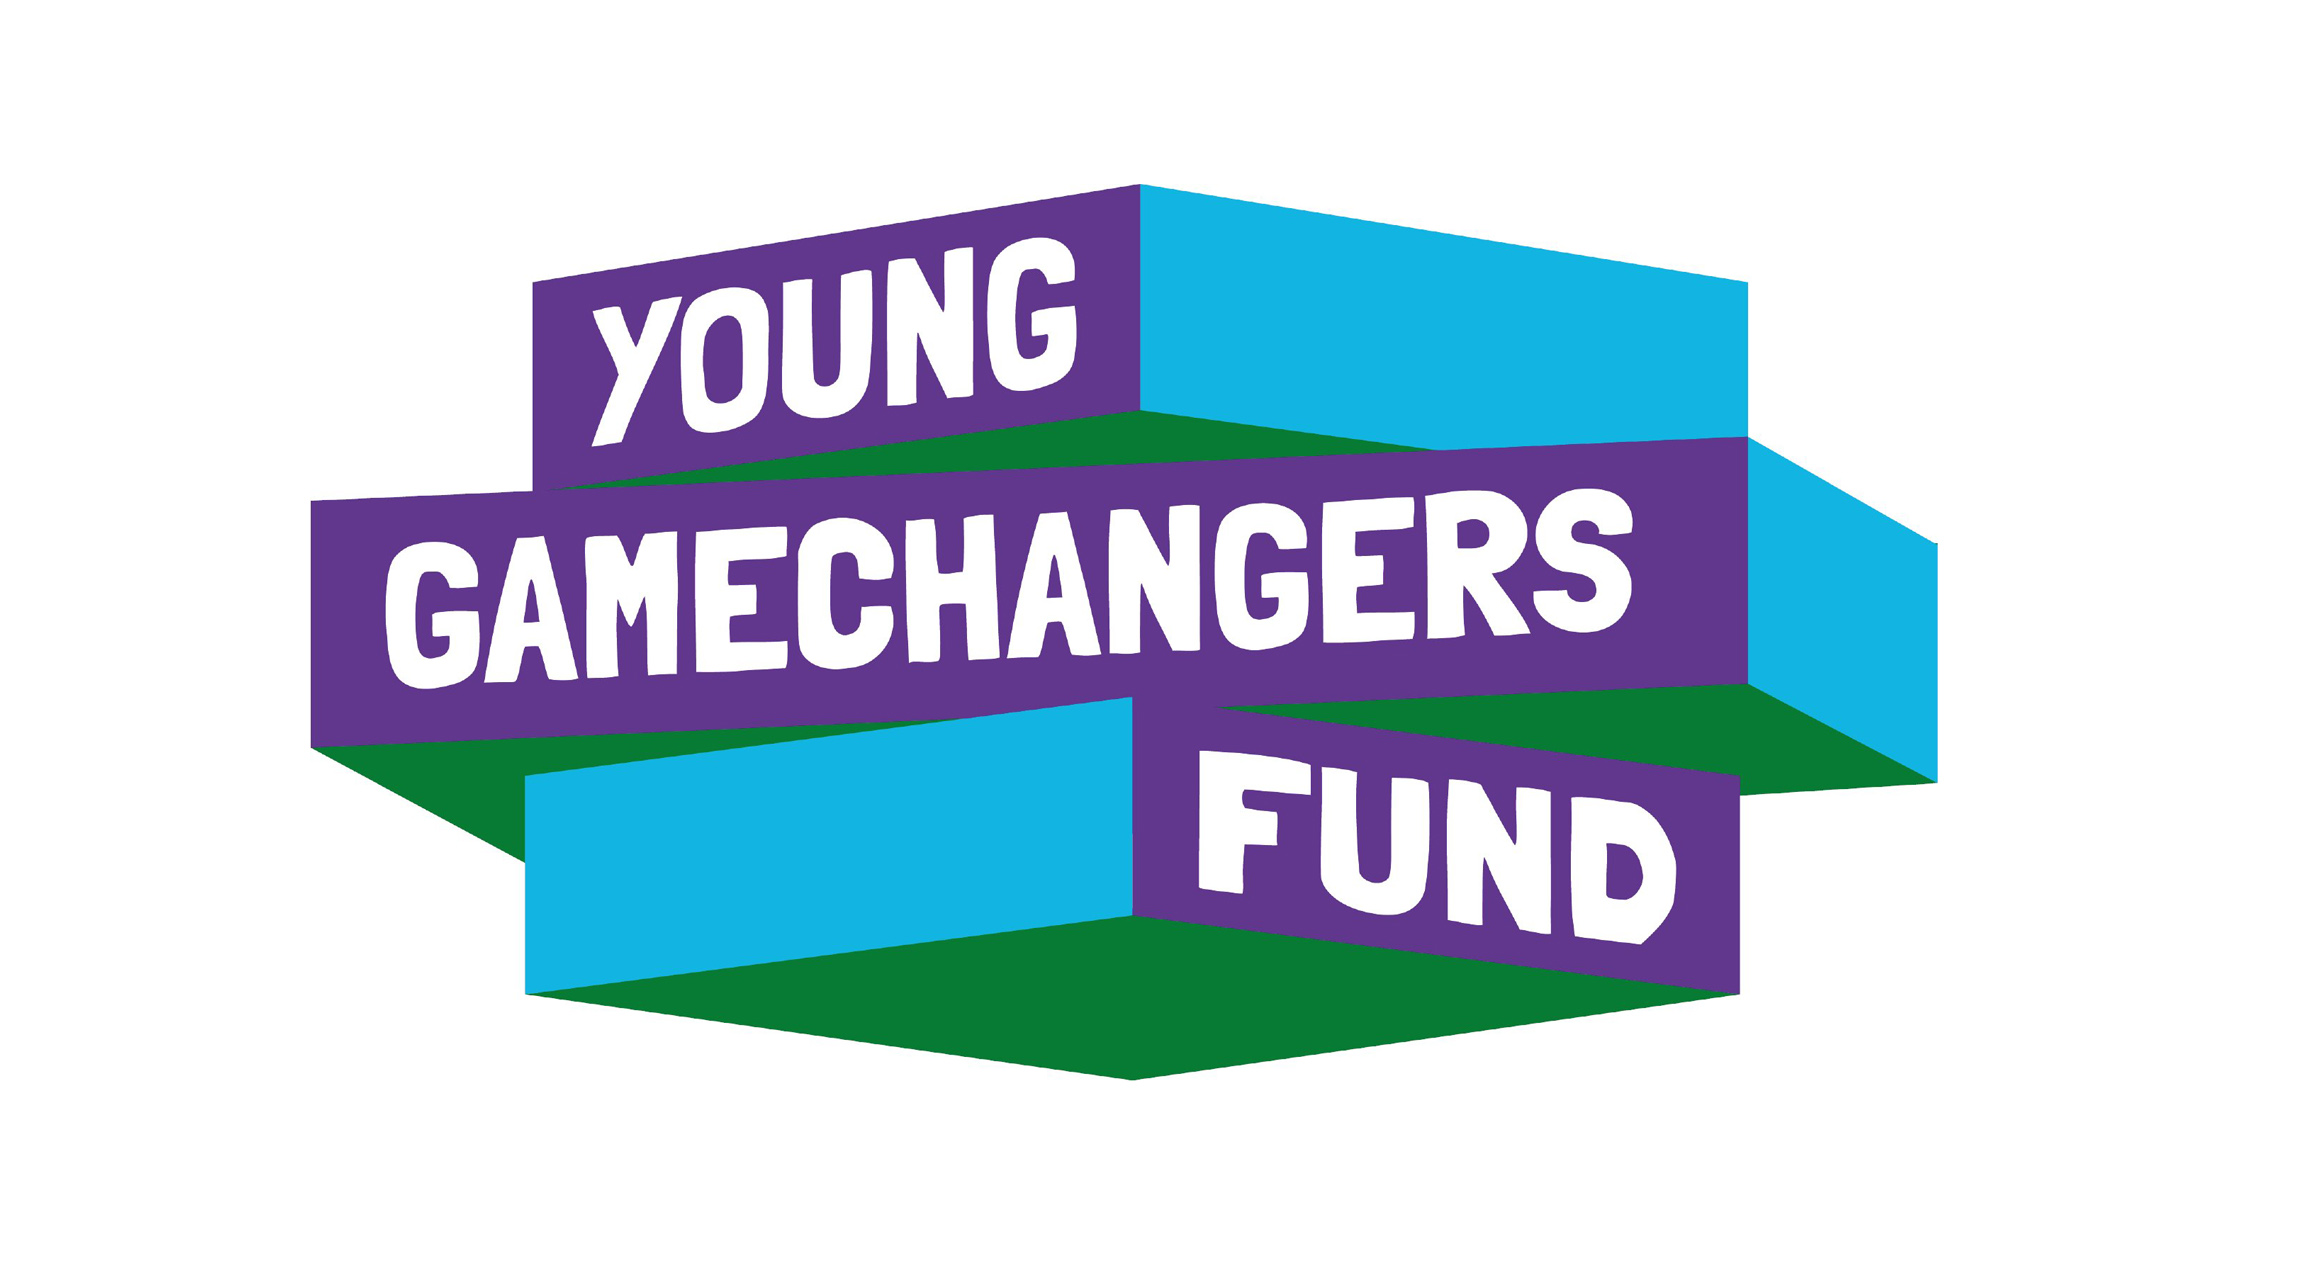 Funding: Young Gamechangers Fund